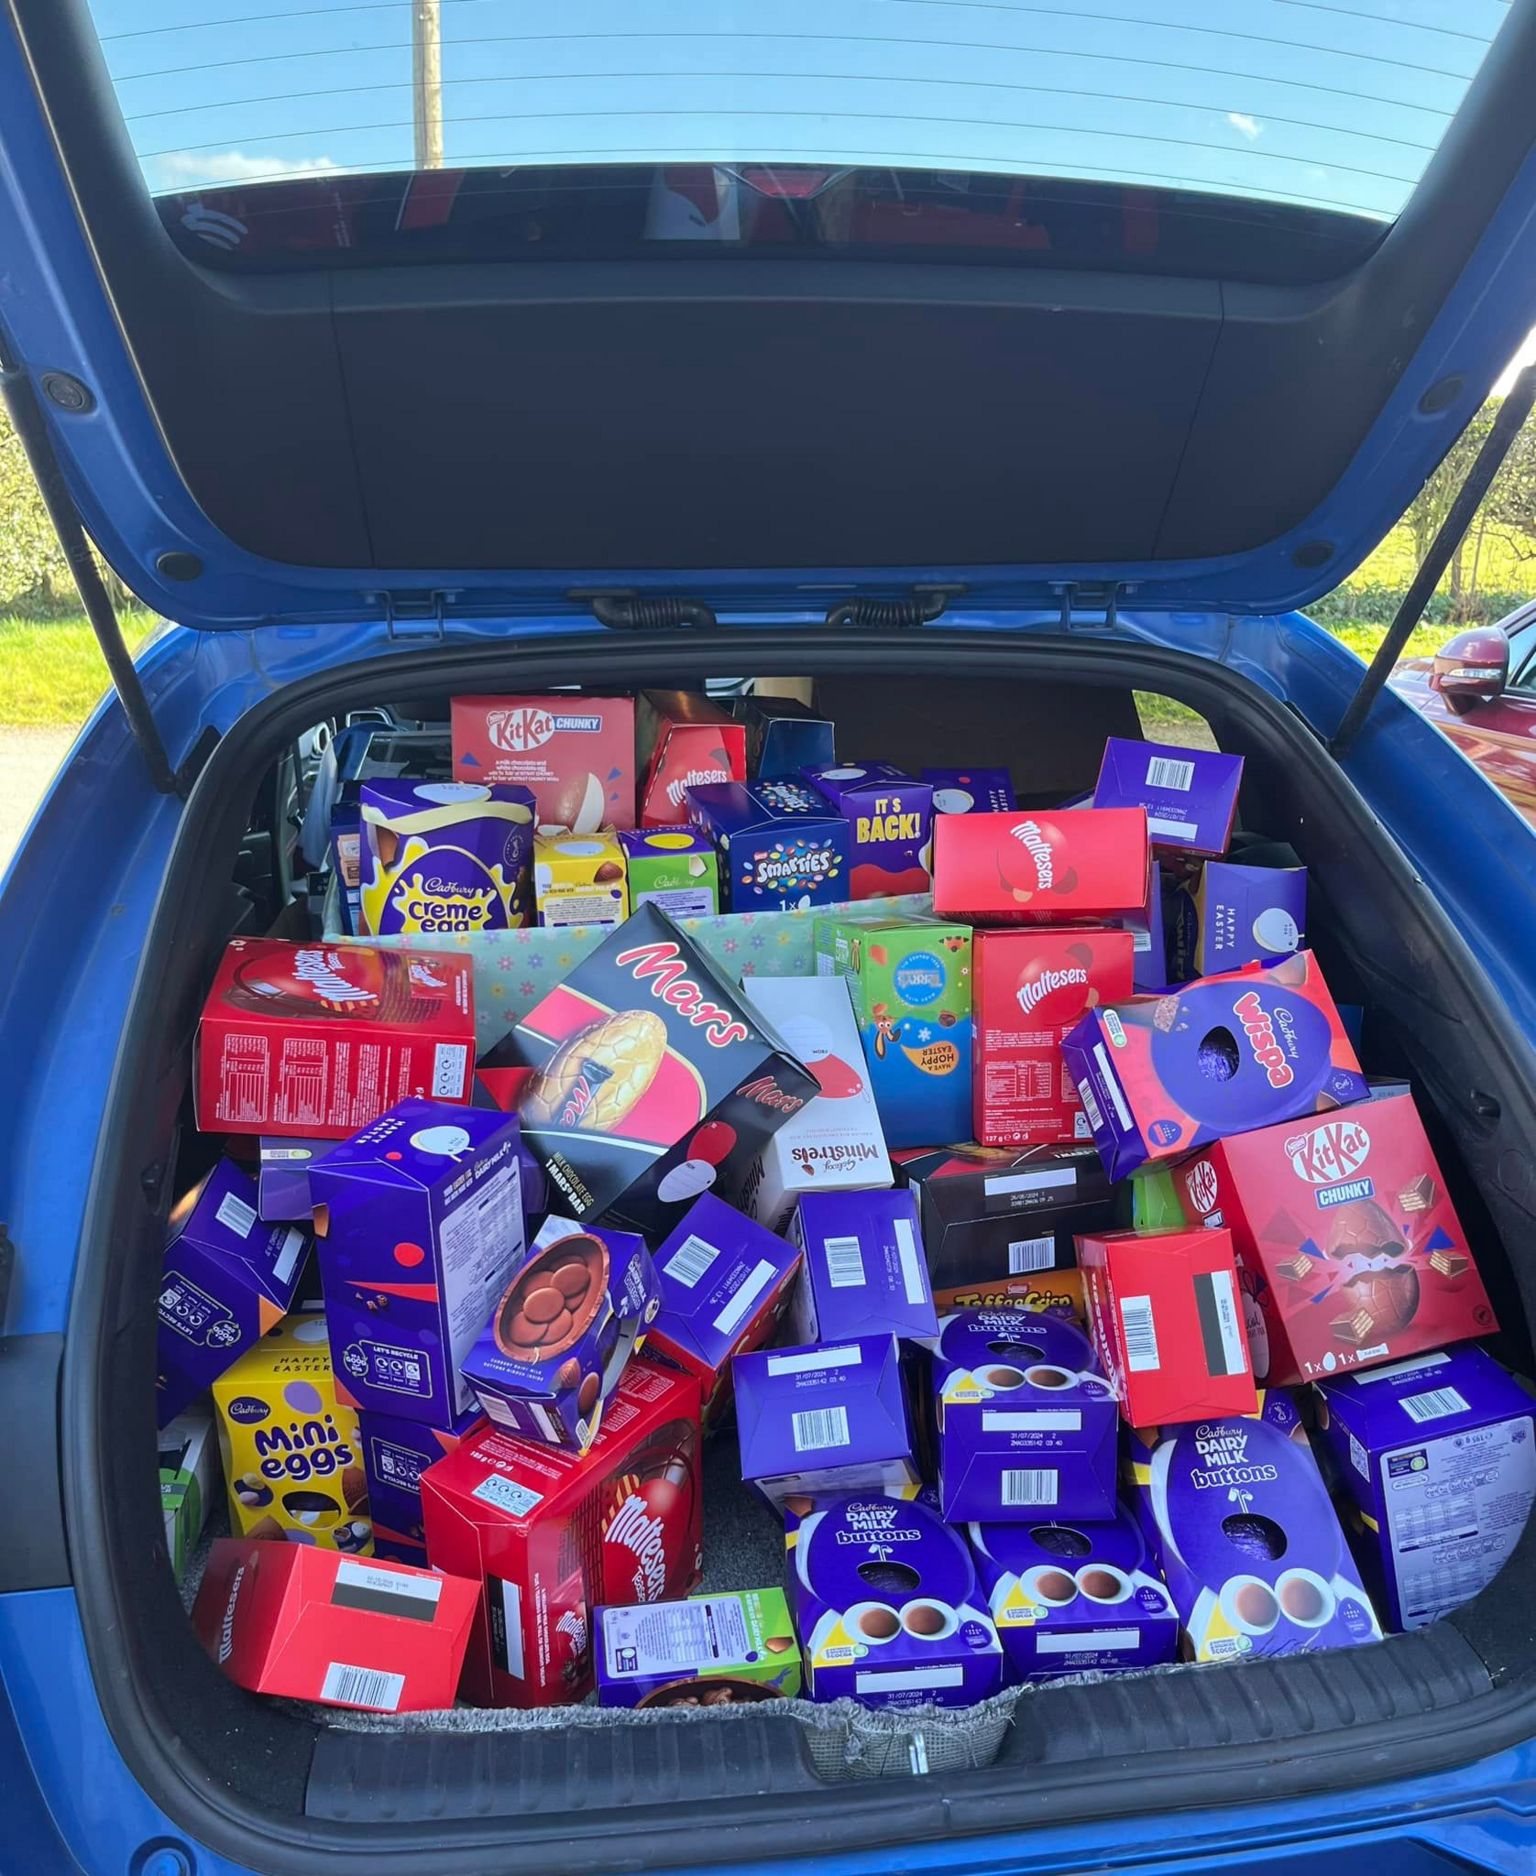 Donated Easter eggs in a car